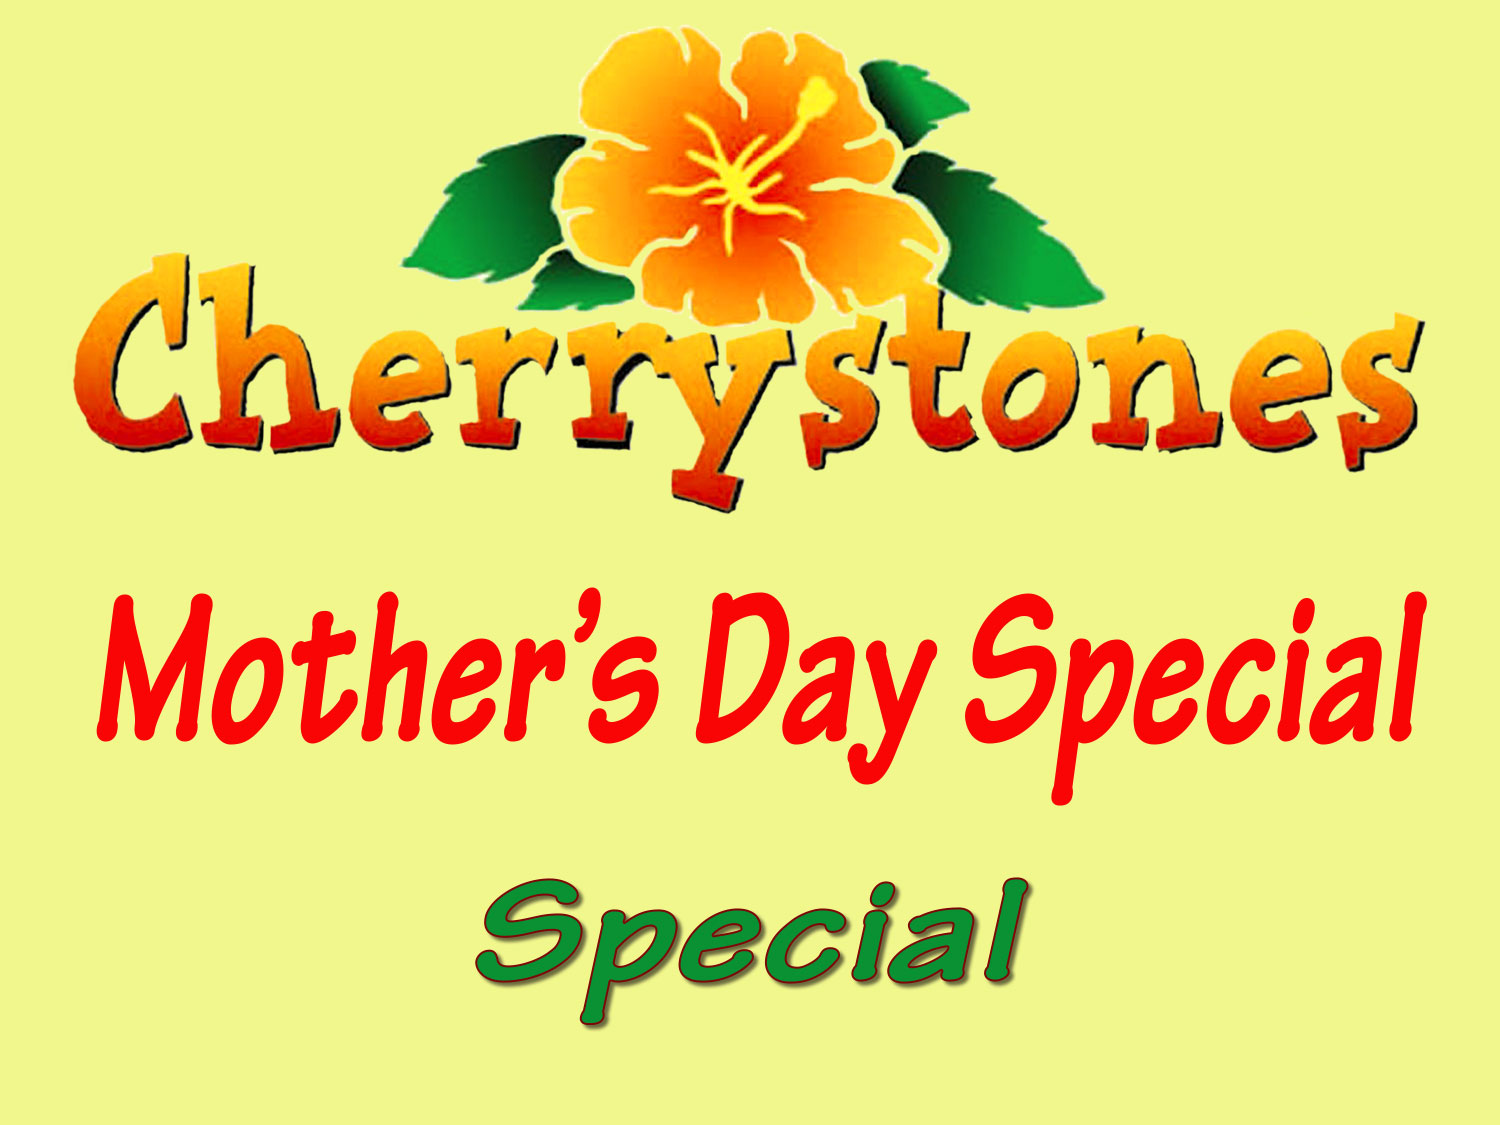 Cherrystone's Mothers Day Special